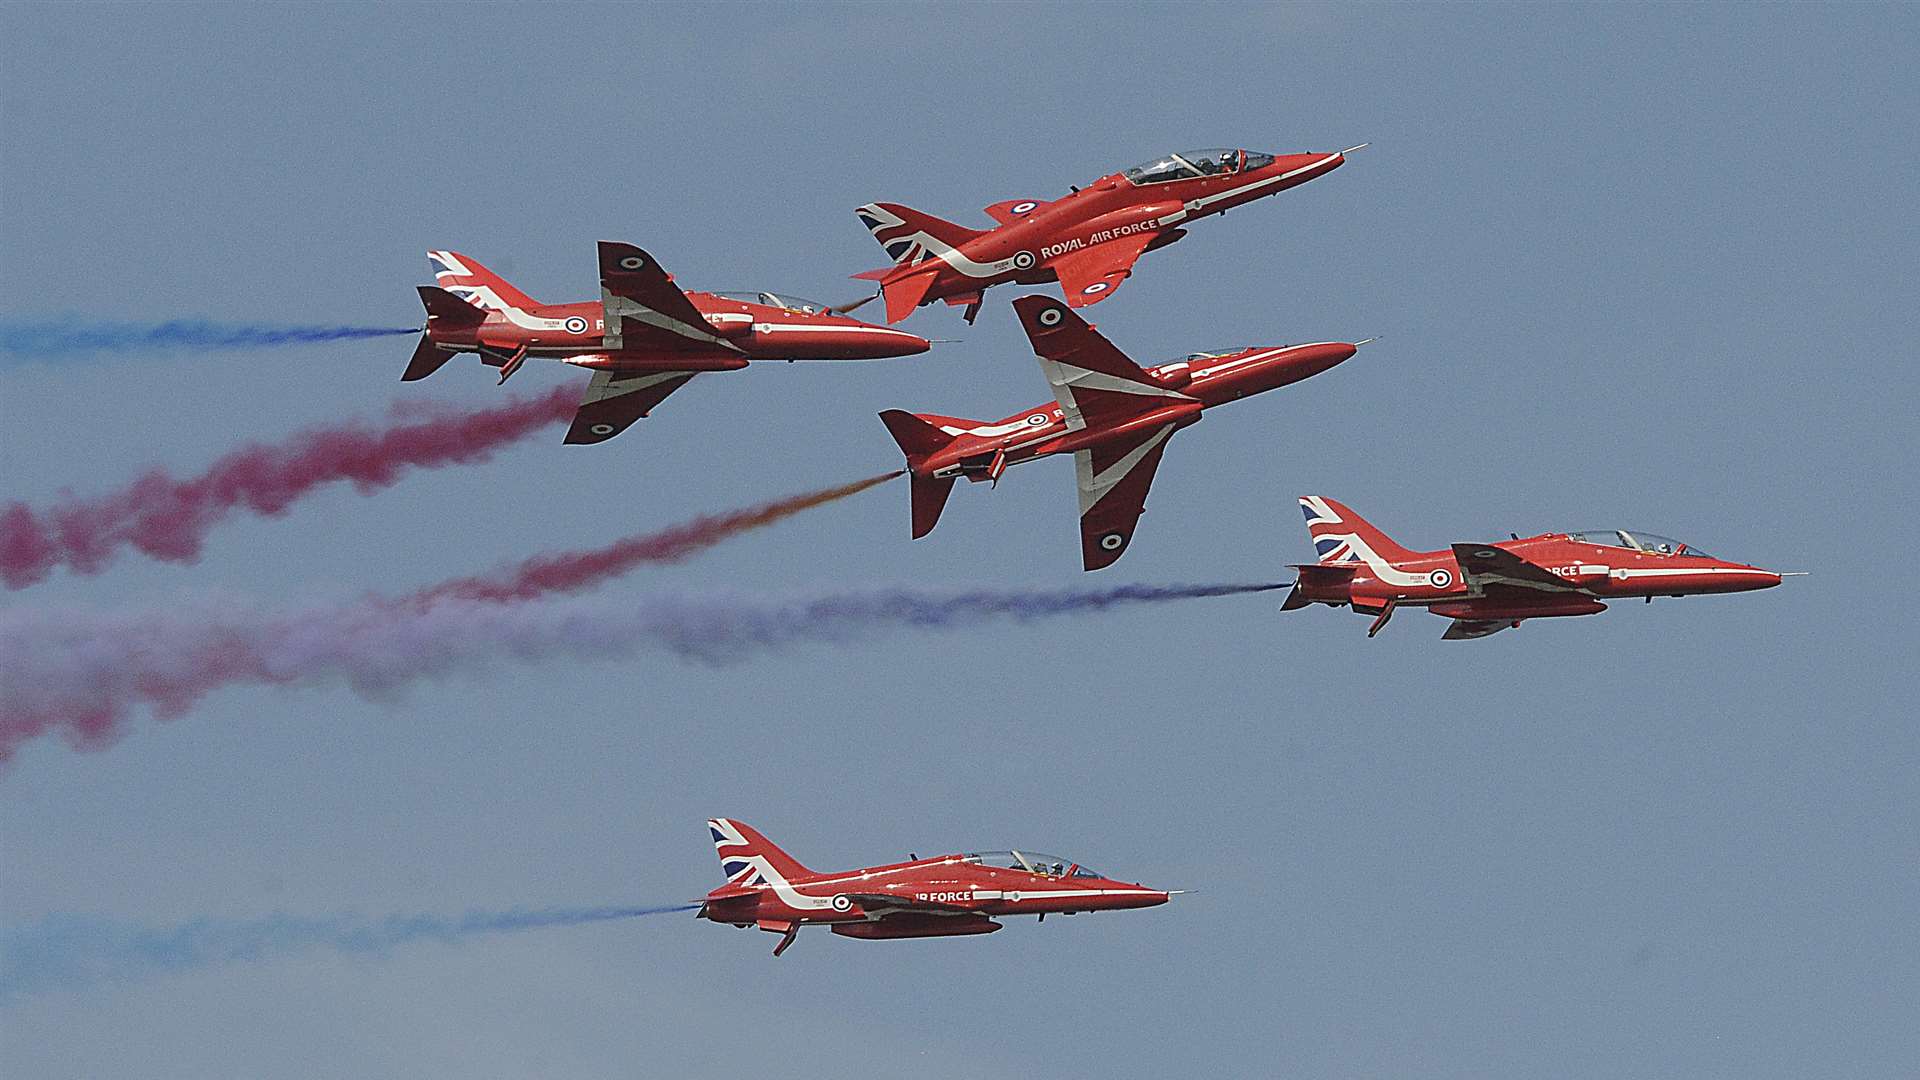 The Red Arrows are coming back to Herne Bay this summer